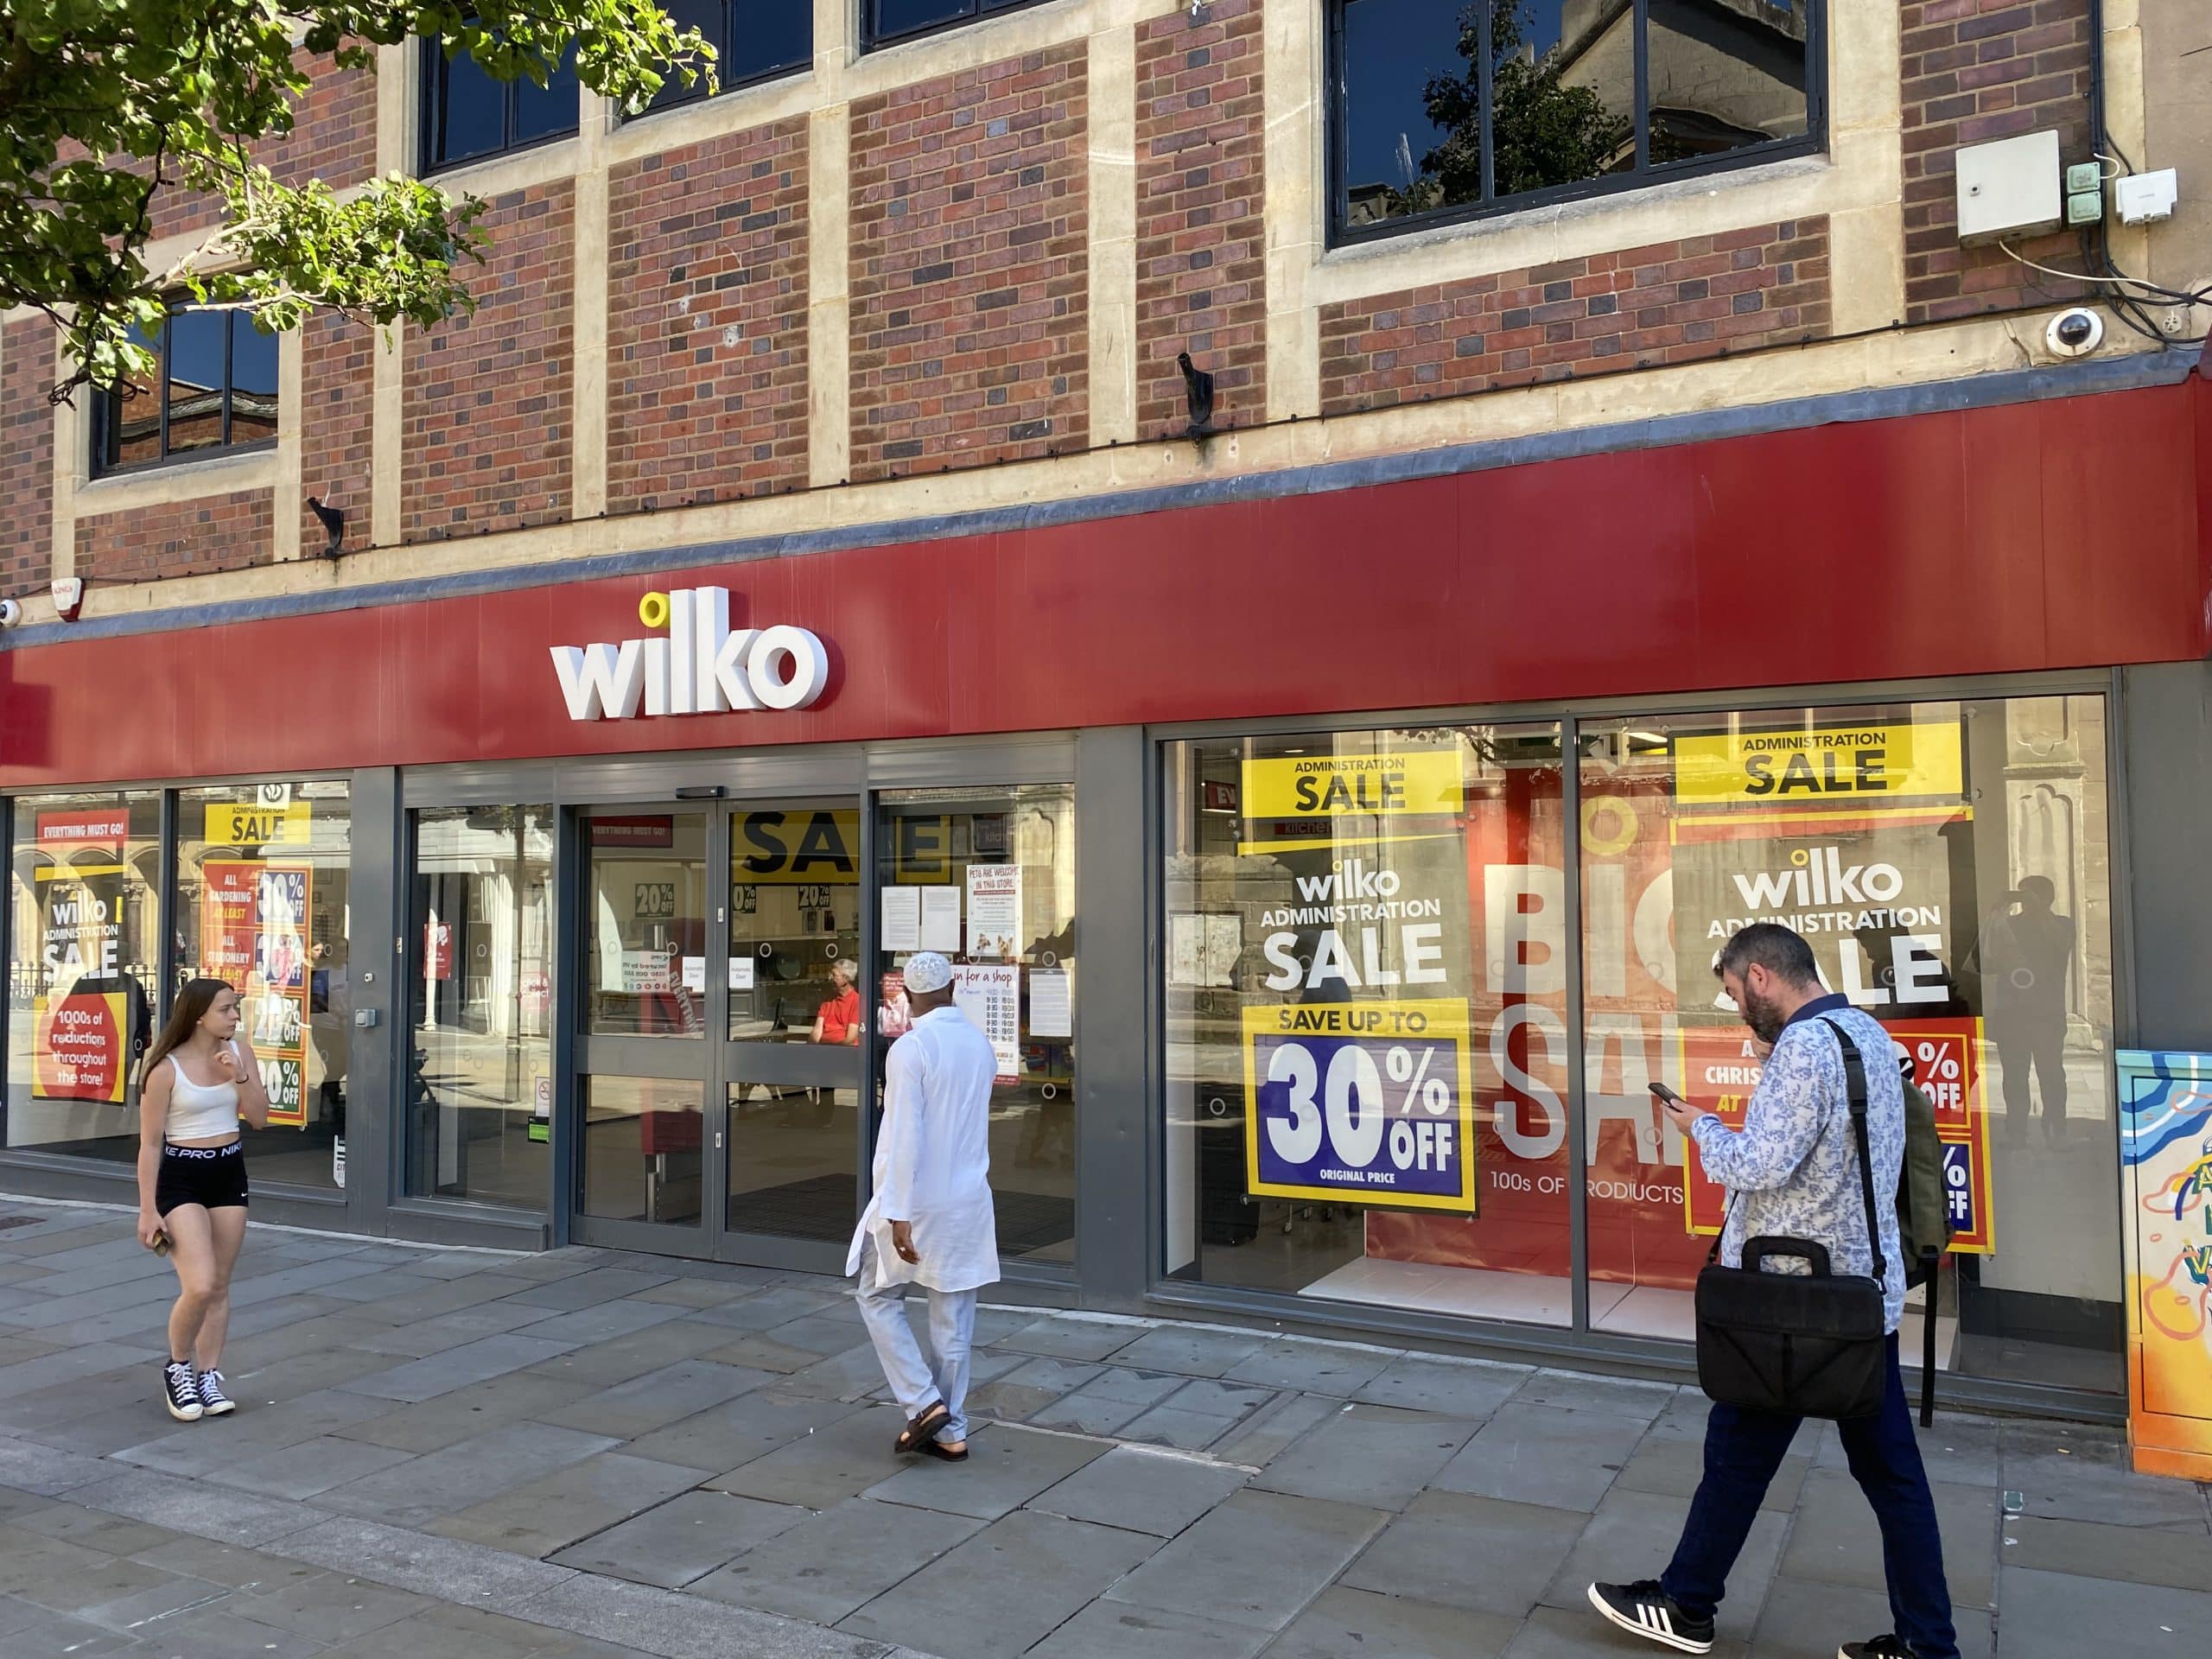 HIGHLIGHTS: All 400 Wilko stores to shut with 12,500 job losses, pound soars above $1.25, UK shareholders enjoy biggest returns in two decades, and more!